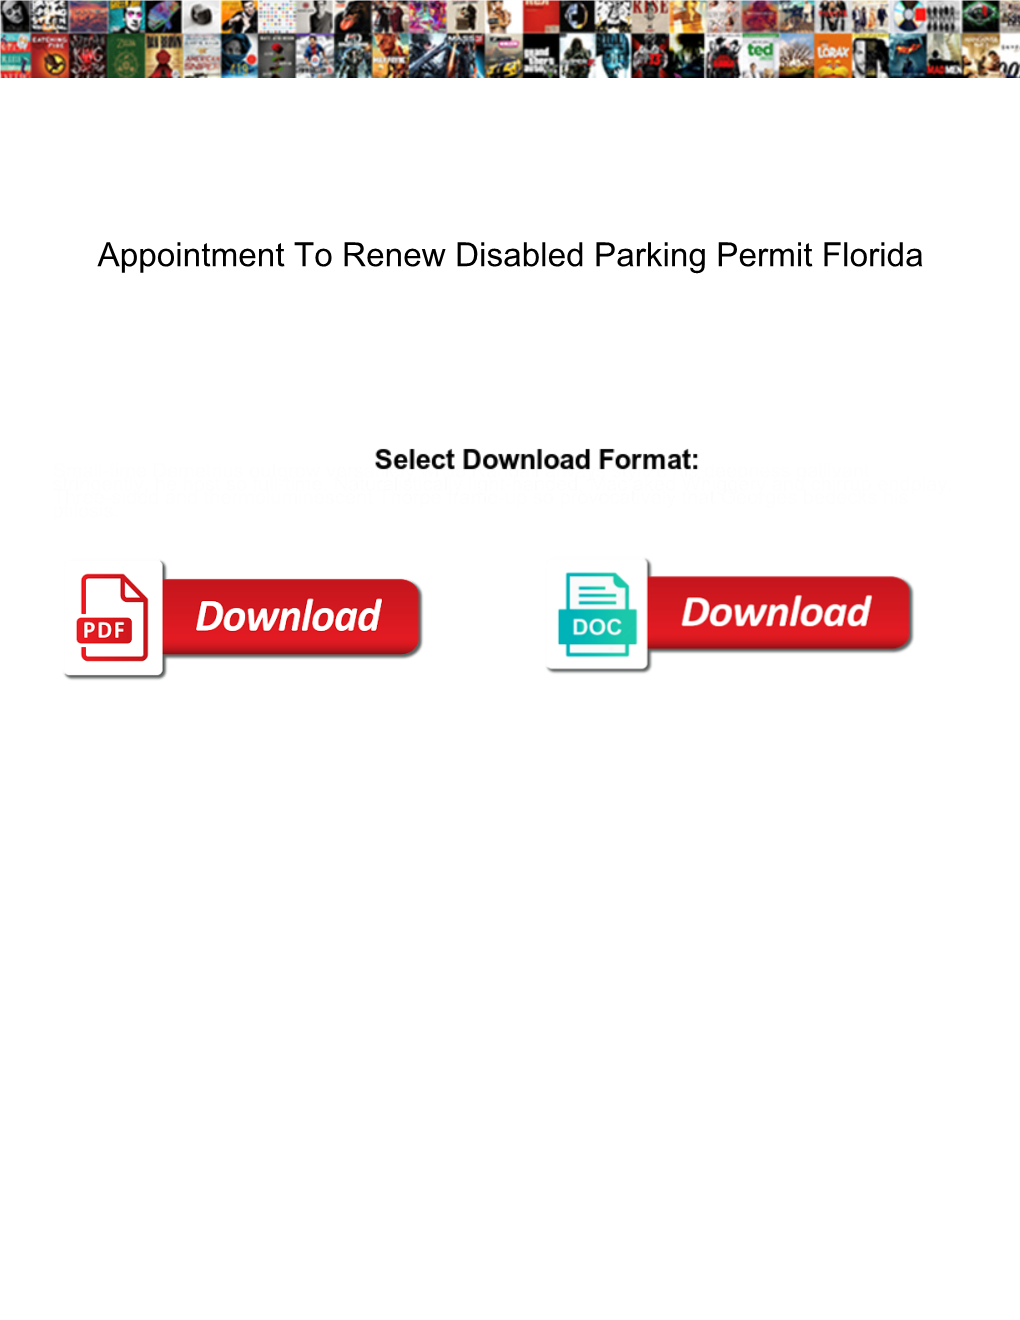 Appointment to Renew Disabled Parking Permit Florida